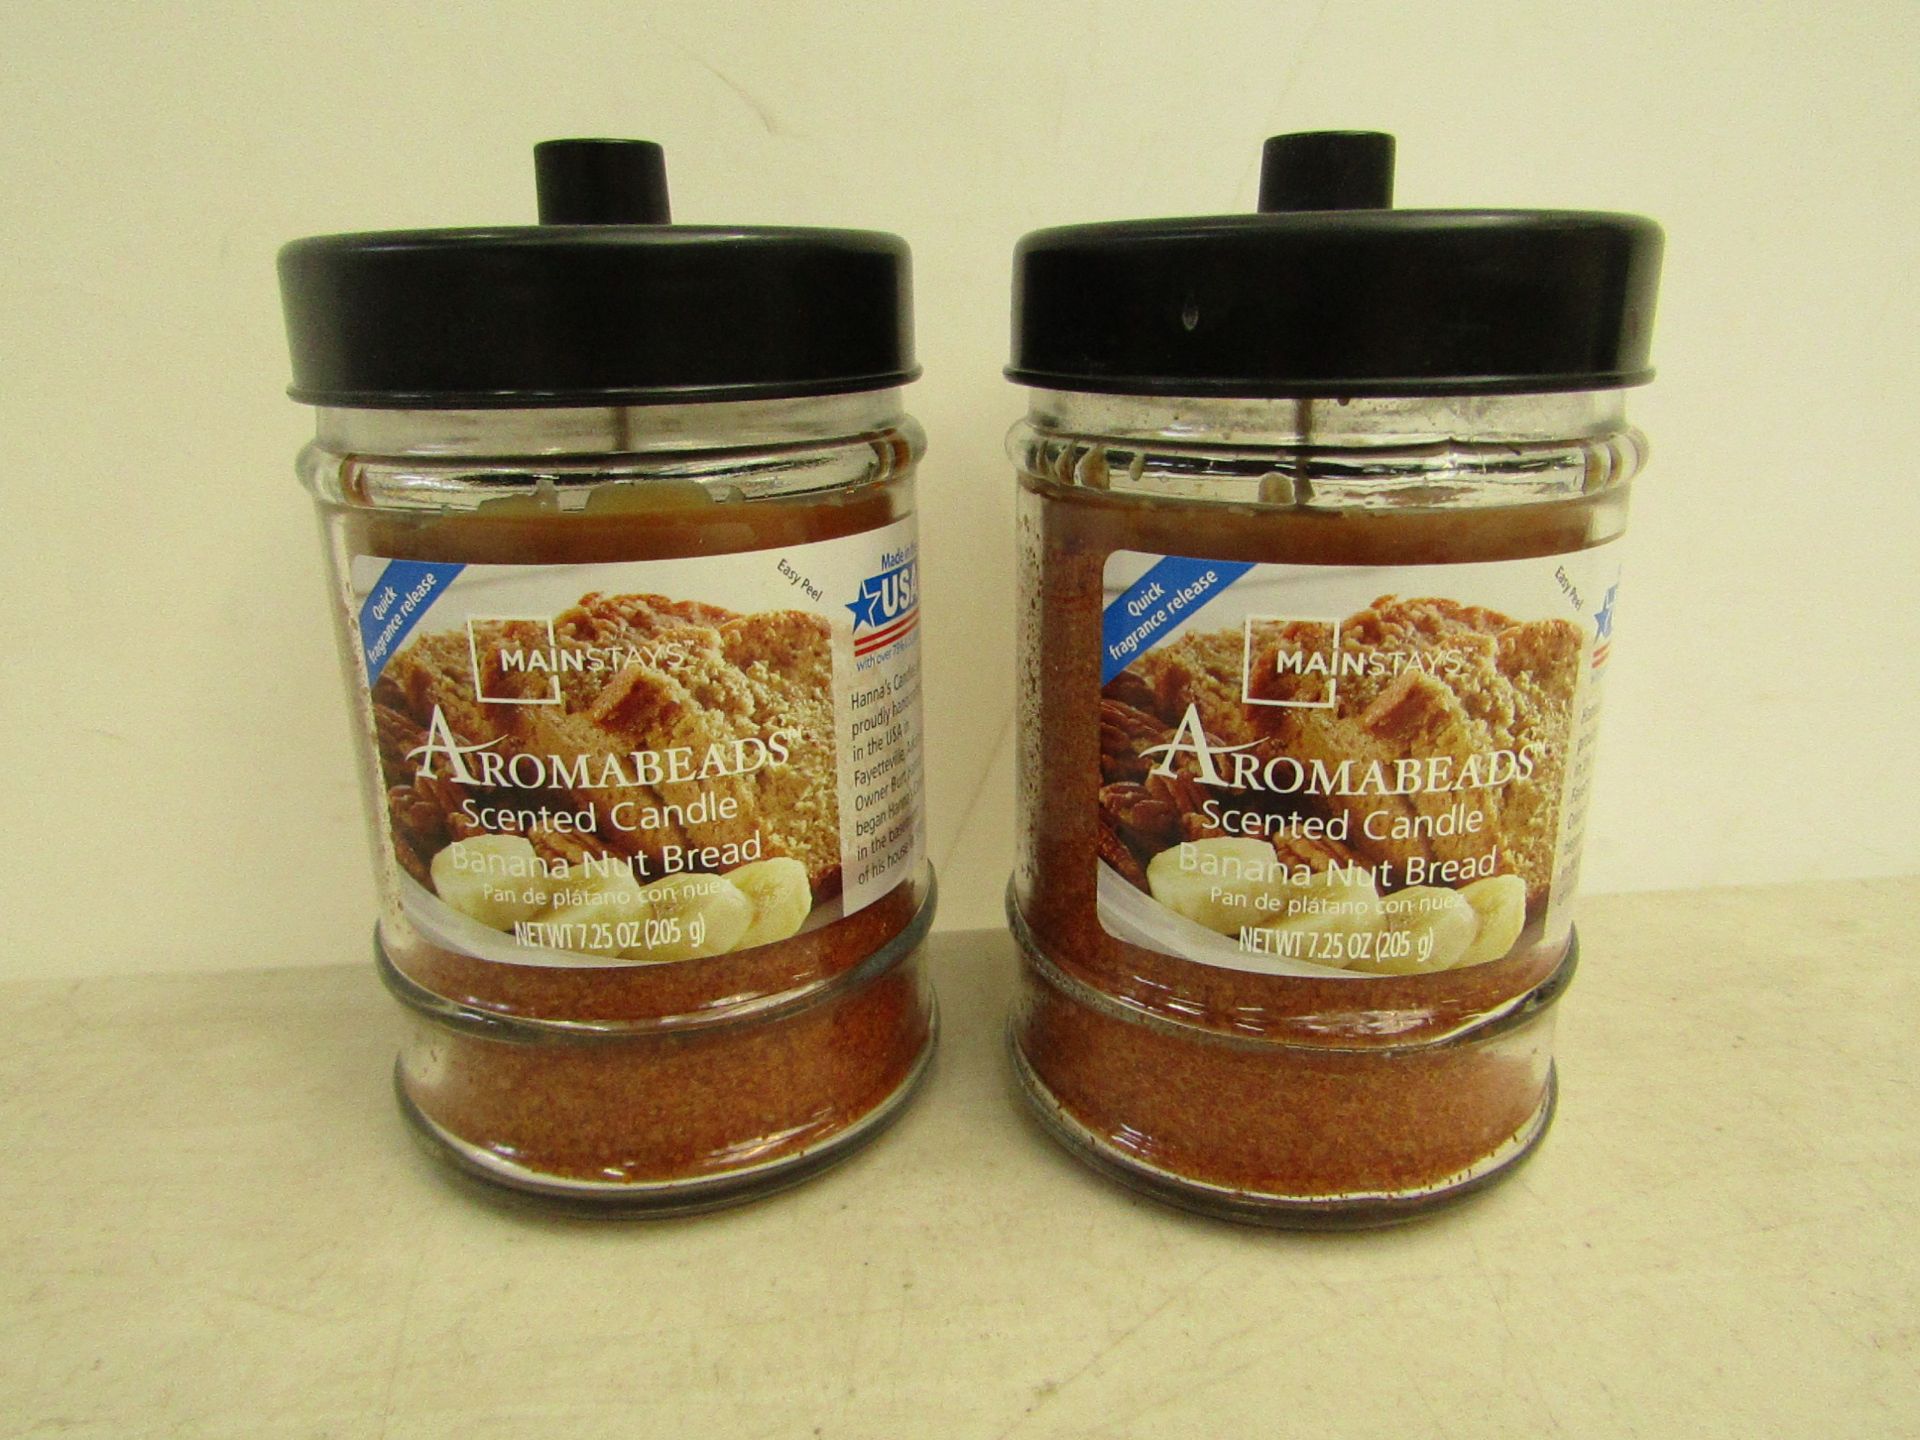 2x MainStays Aromabeads scented candles Banana Nut Bread, each jar contains 205g both new.